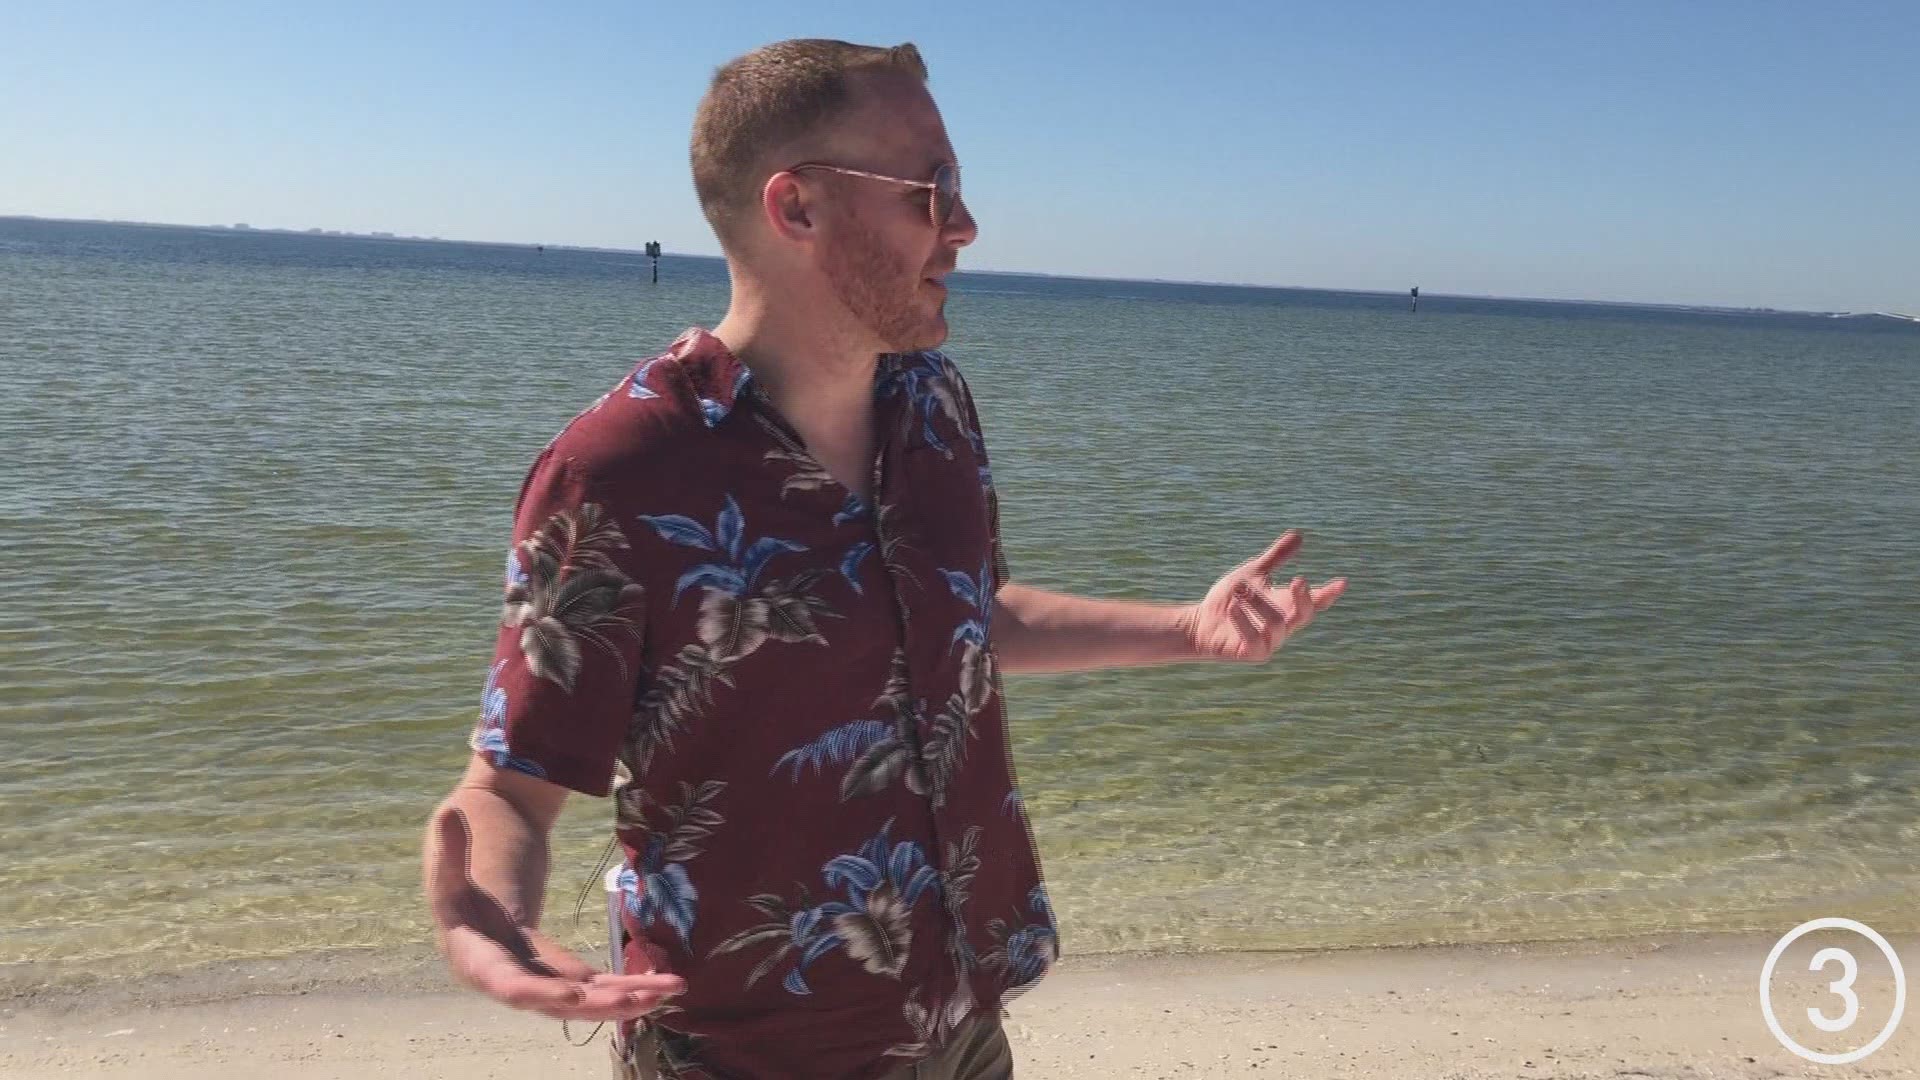 Mike Polk Jr. found a beach during his one-day trip to Florida. He says the beach has a very Tampa-esque feel.